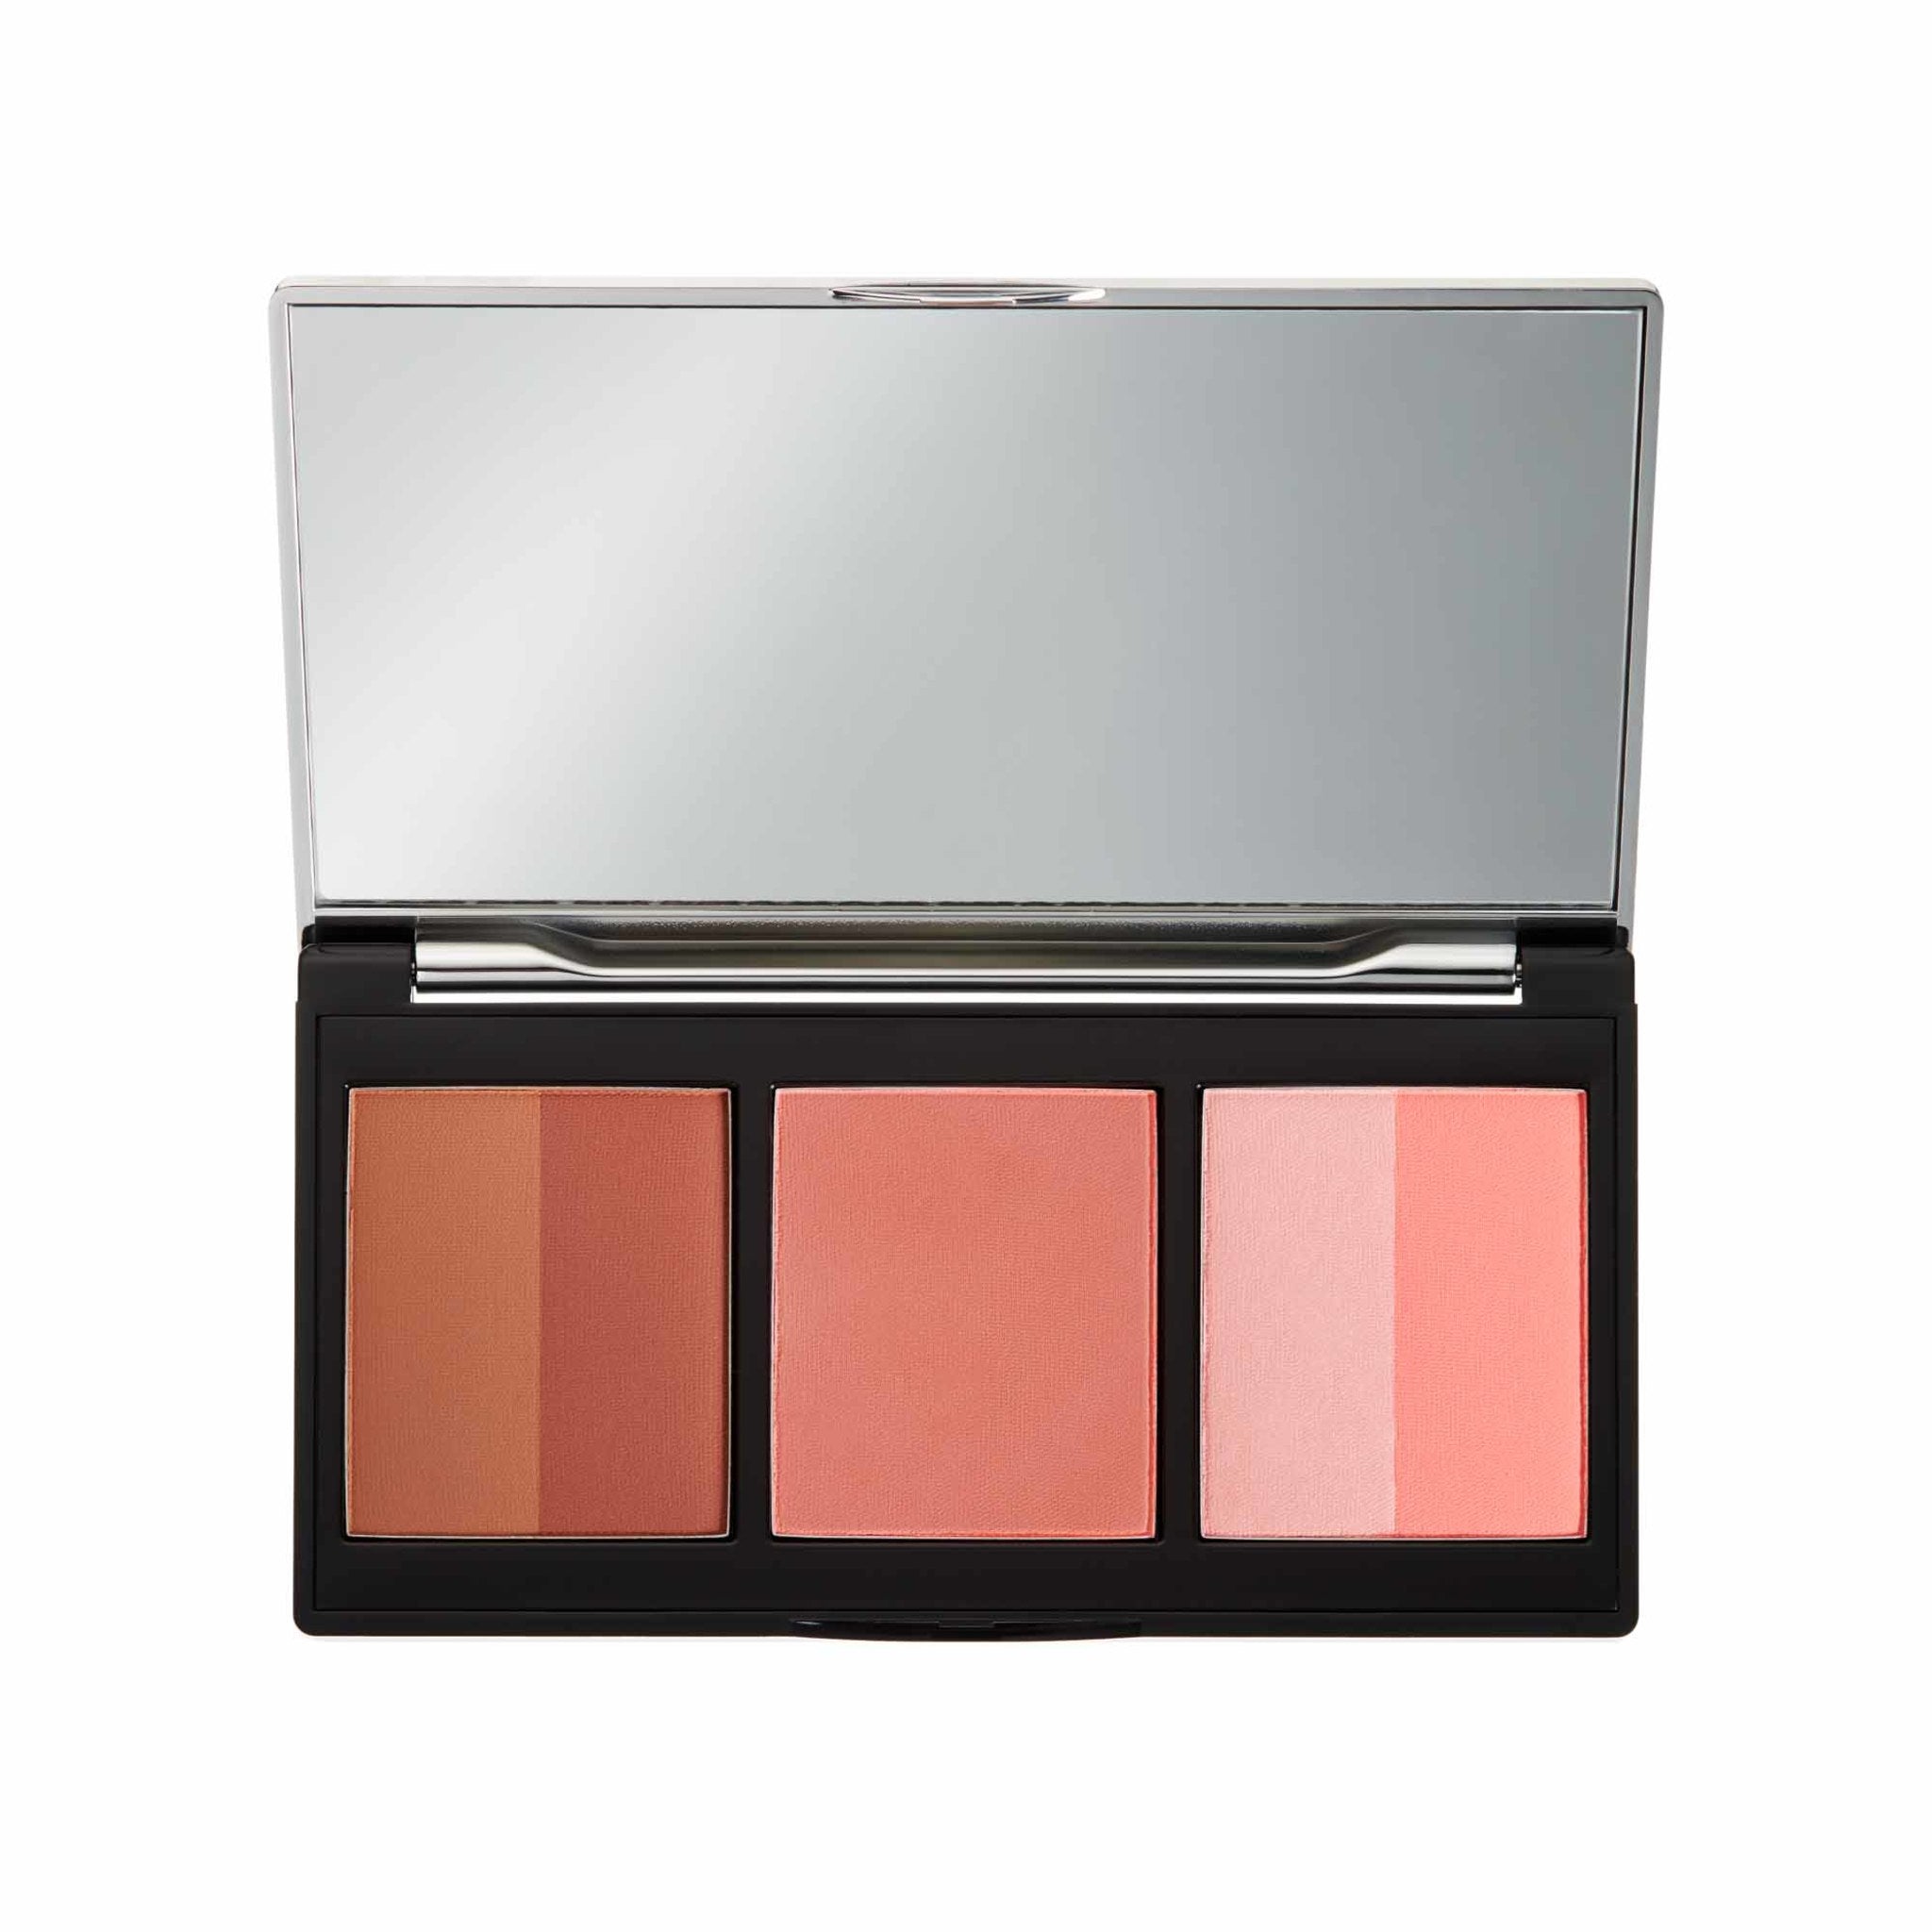 Rodial I Woke Up Like This Palette main image. This product is in the color multi